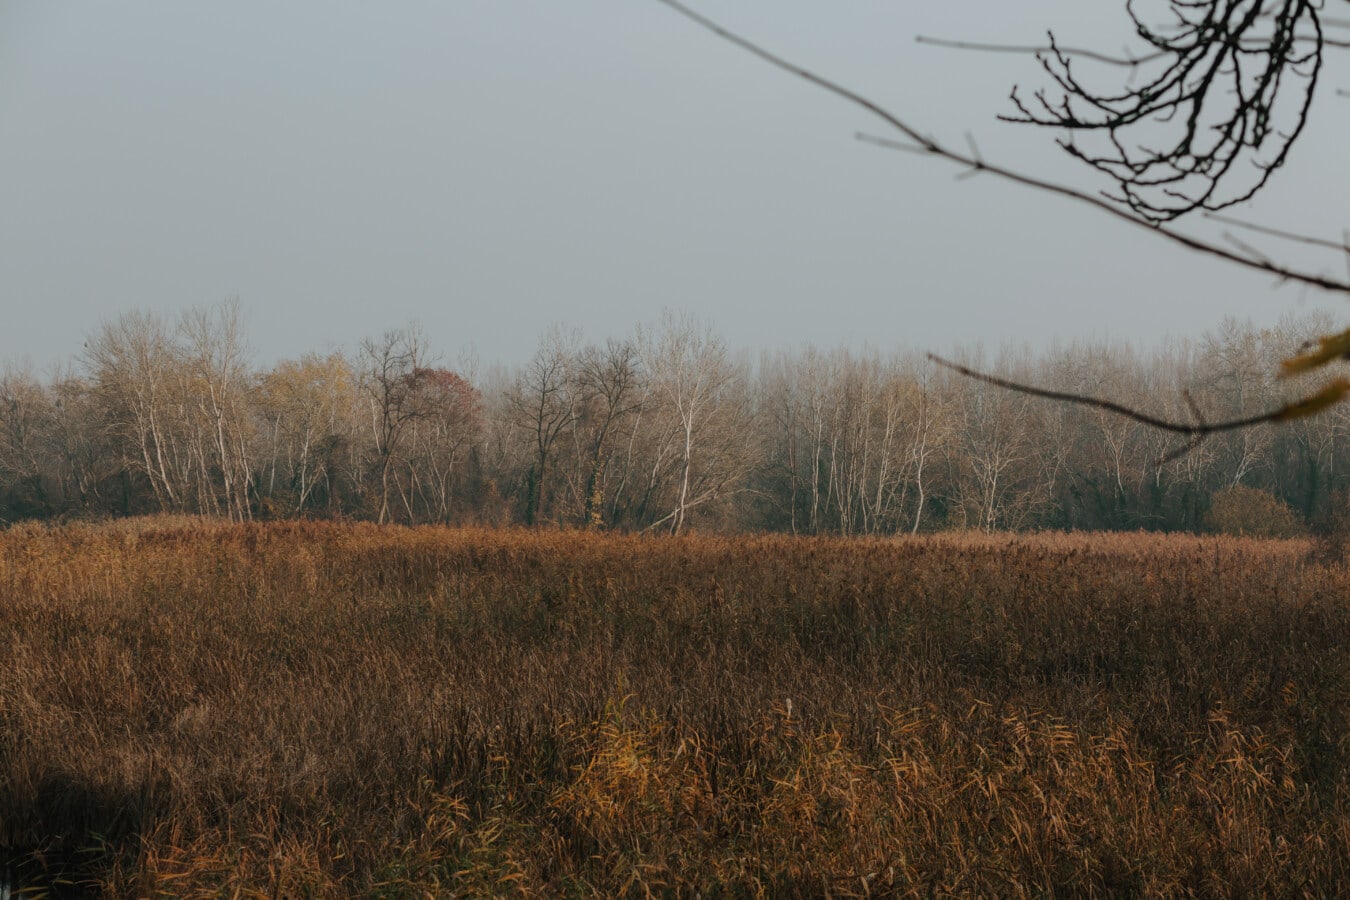 autumn, marshland, reeds, reed grass, nature, landscape, rural, tree, color, weather